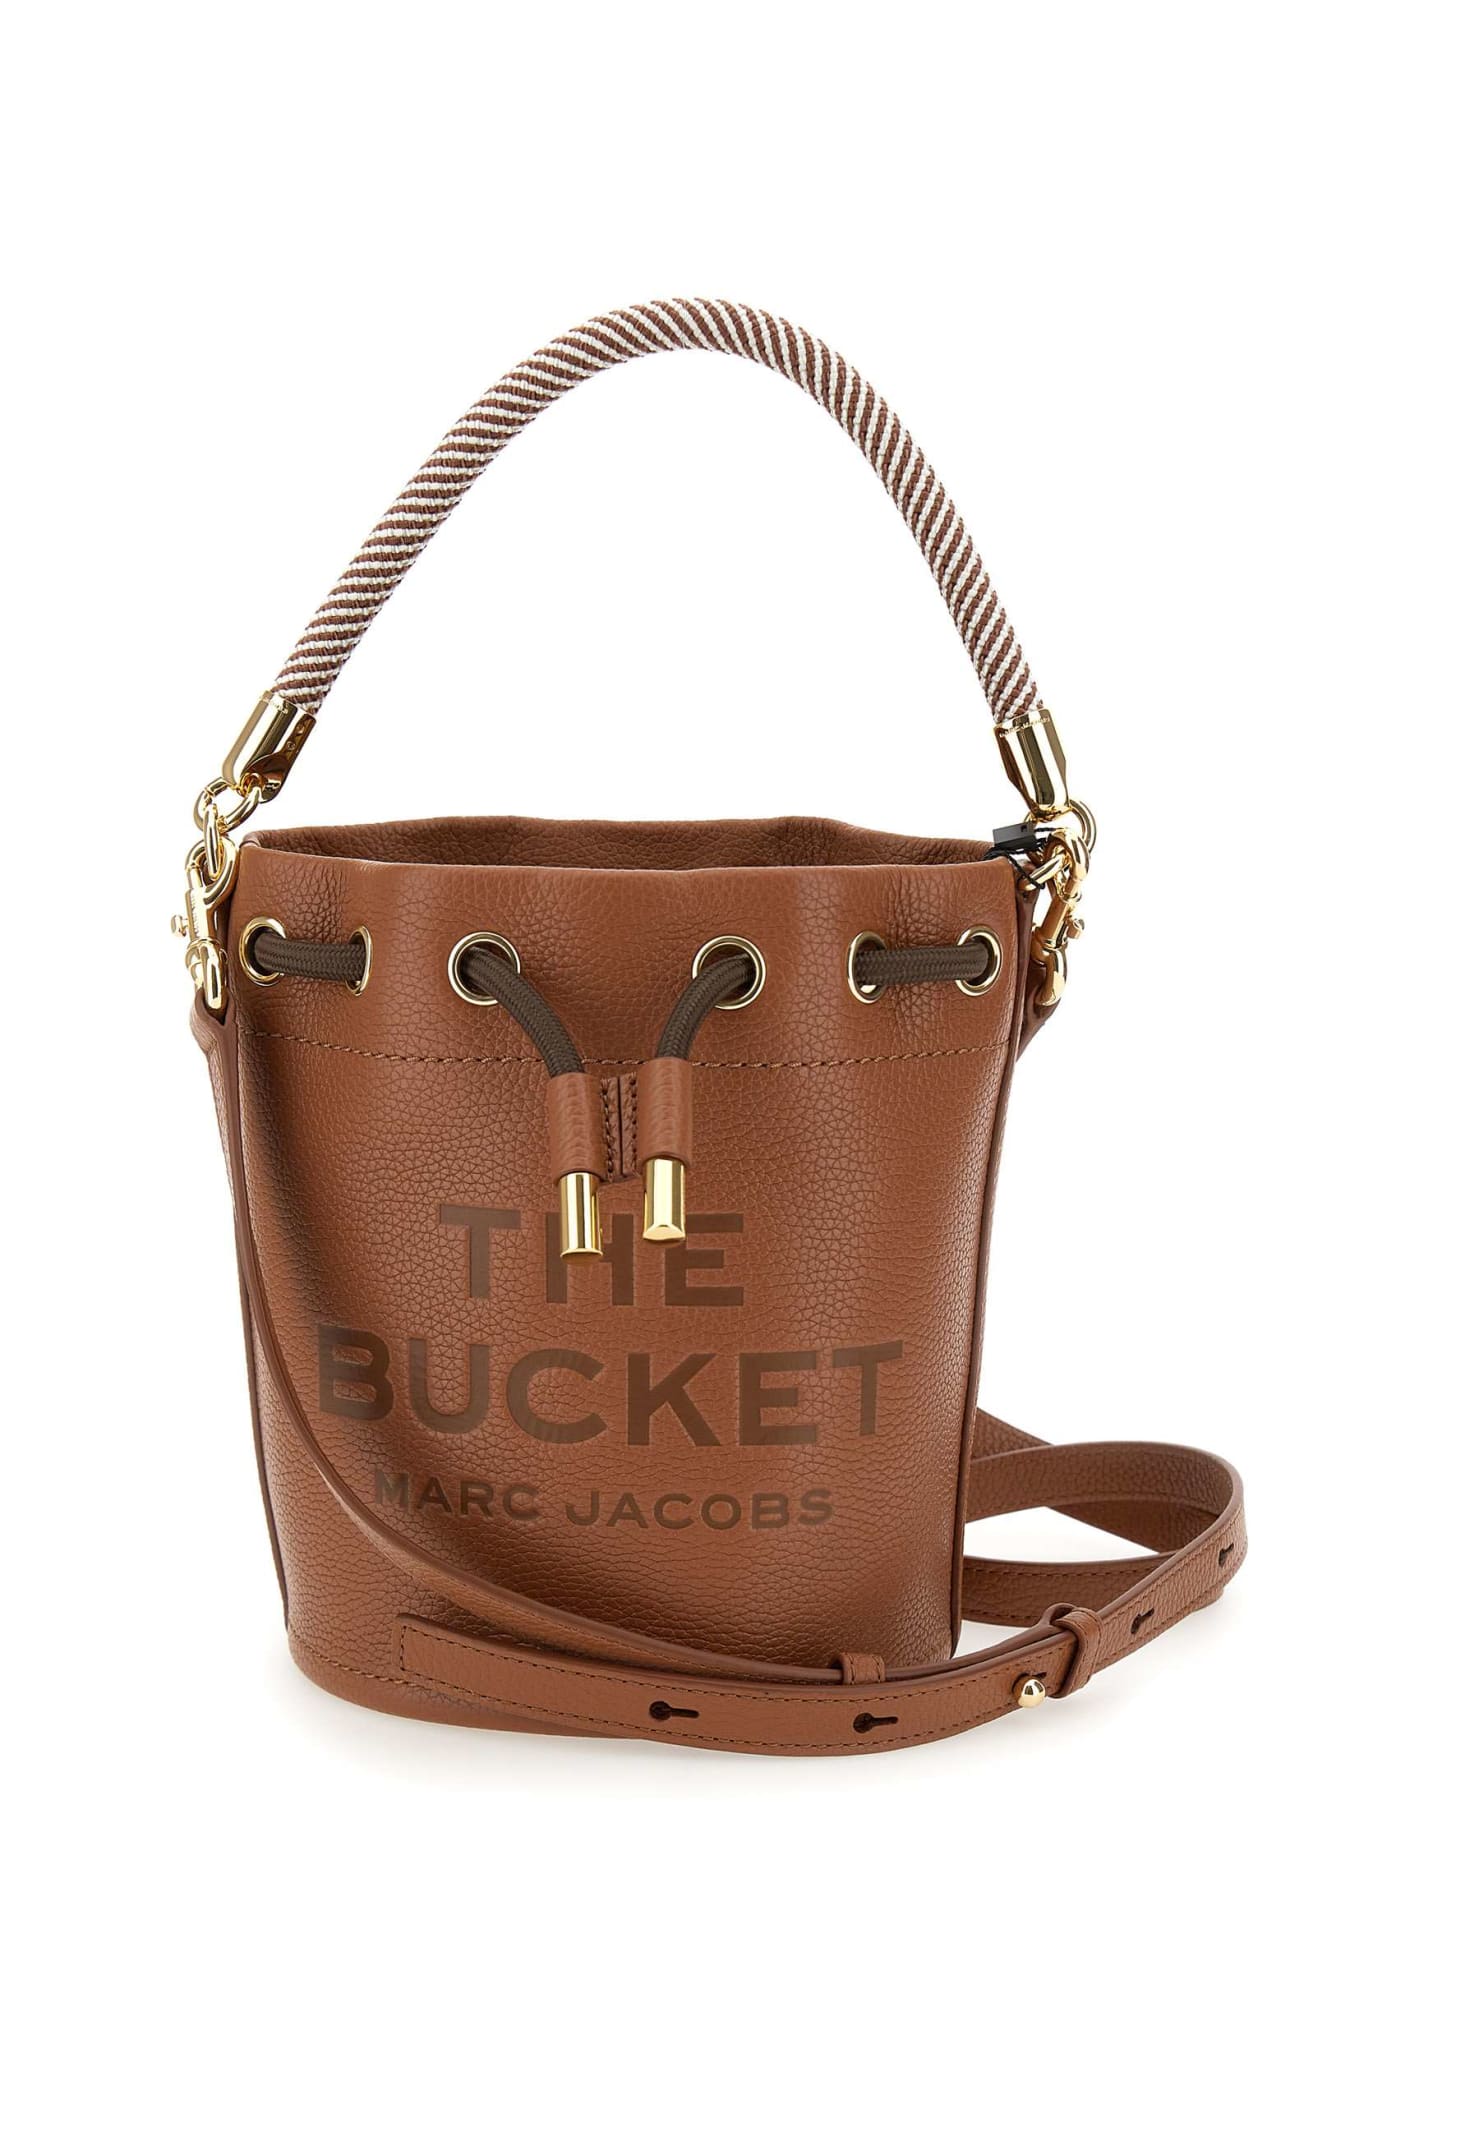 Marc Jacobs the Bucket Leather Bag